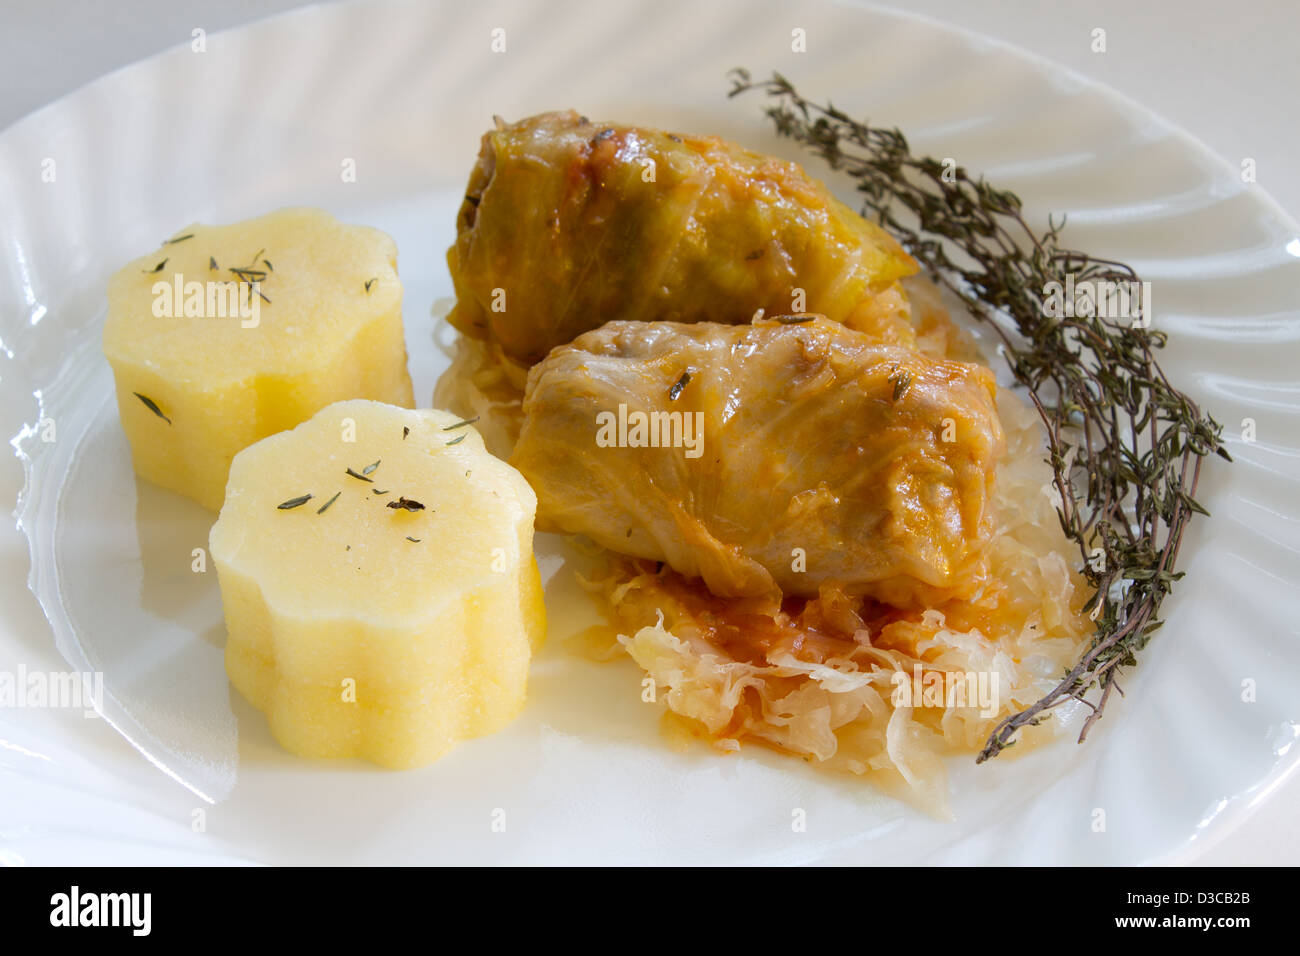 Romanian traditional cuisine, sarmale (rolls stuffed cabbage with meat) Stock Photo